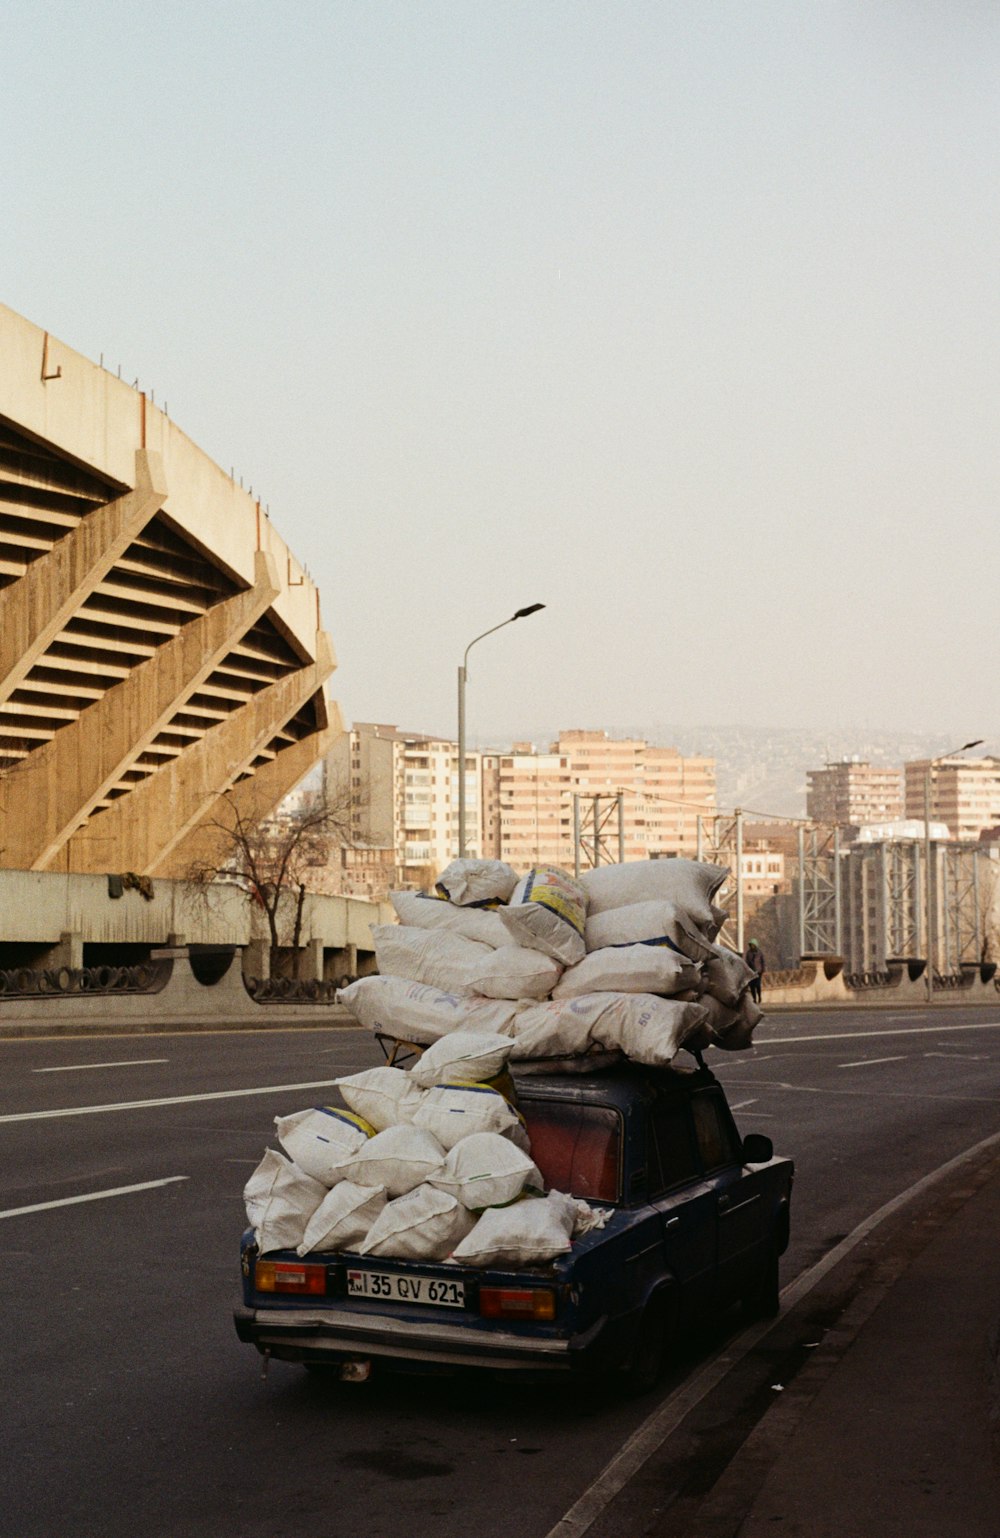 a truck loaded with bags driving down a street